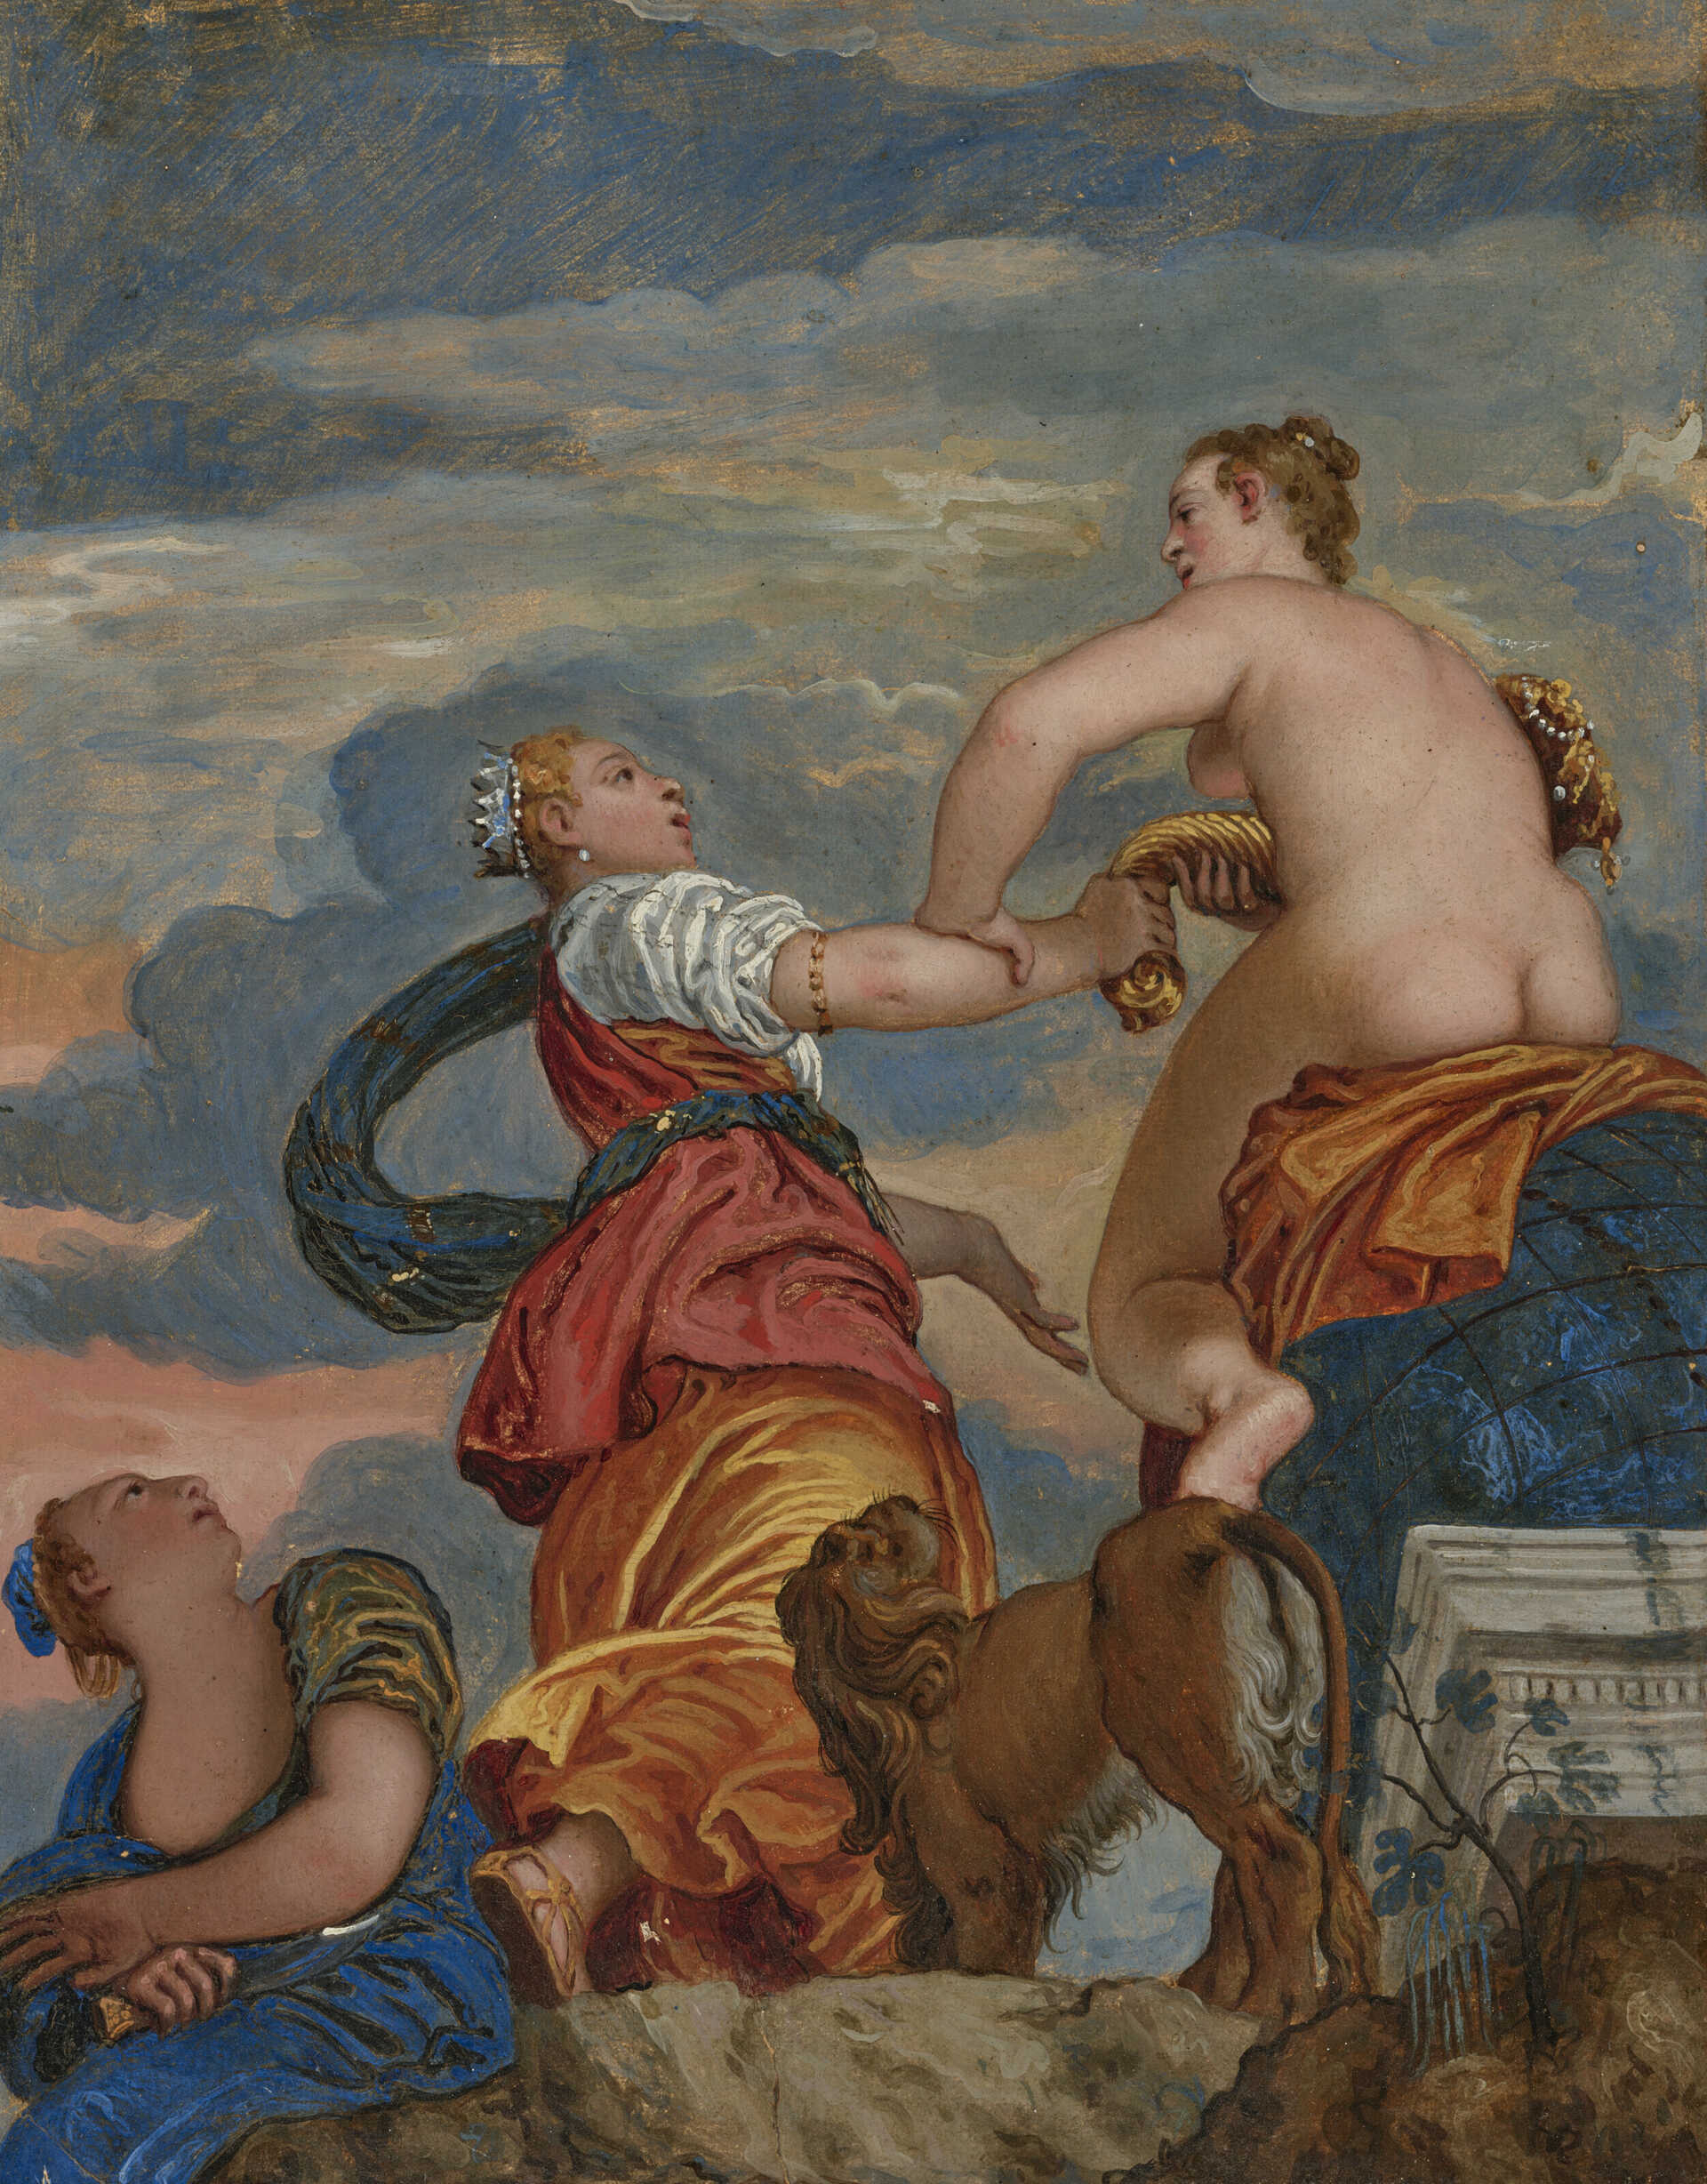 AFTER PAOLO CALIARI, CALLED PAOLO VERONESE